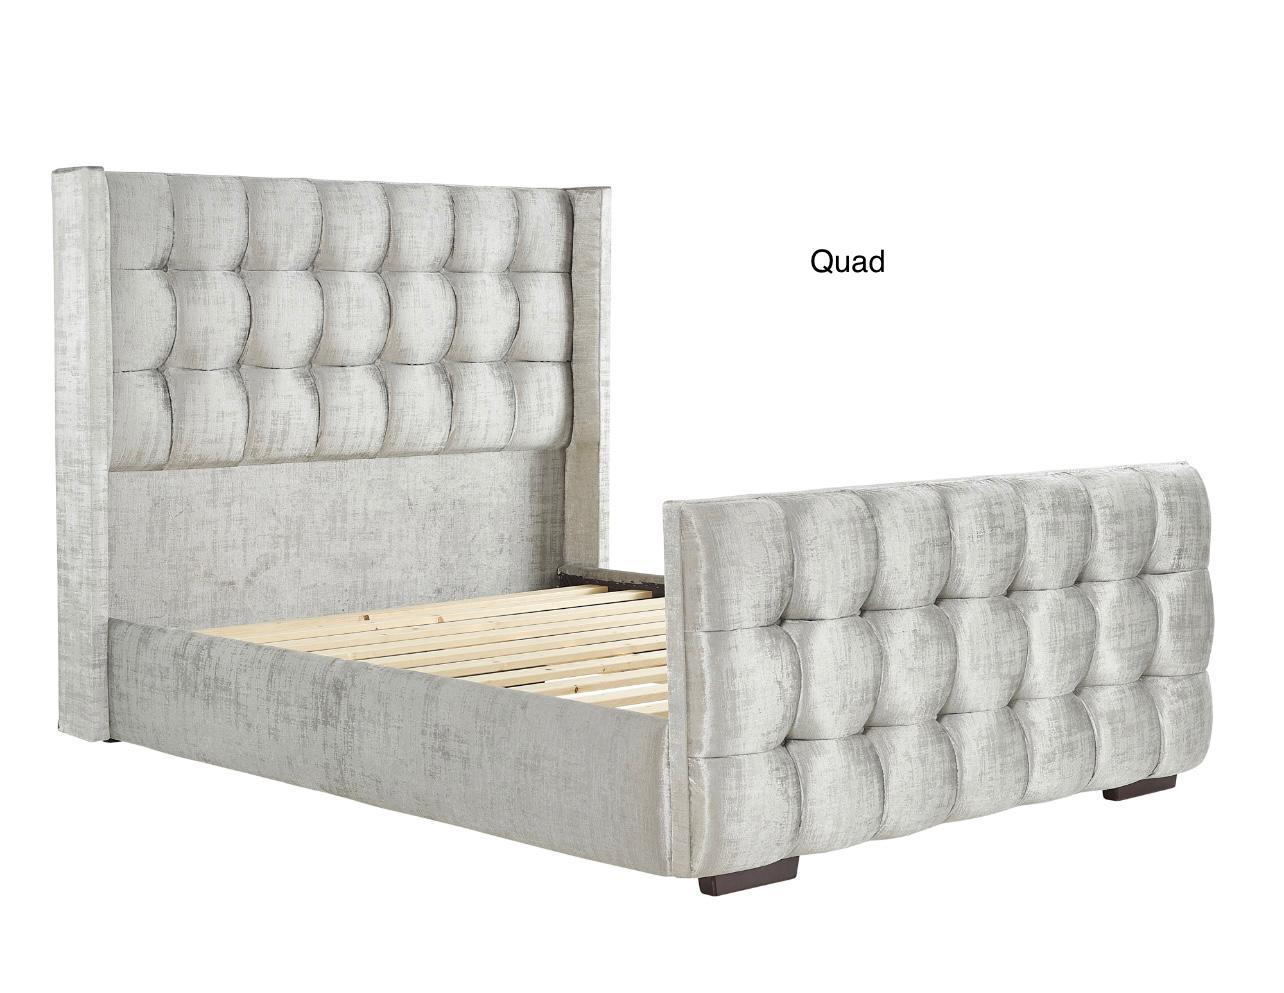 Stylish Fabric Bedstead with Winged Headboard & High Foot-End